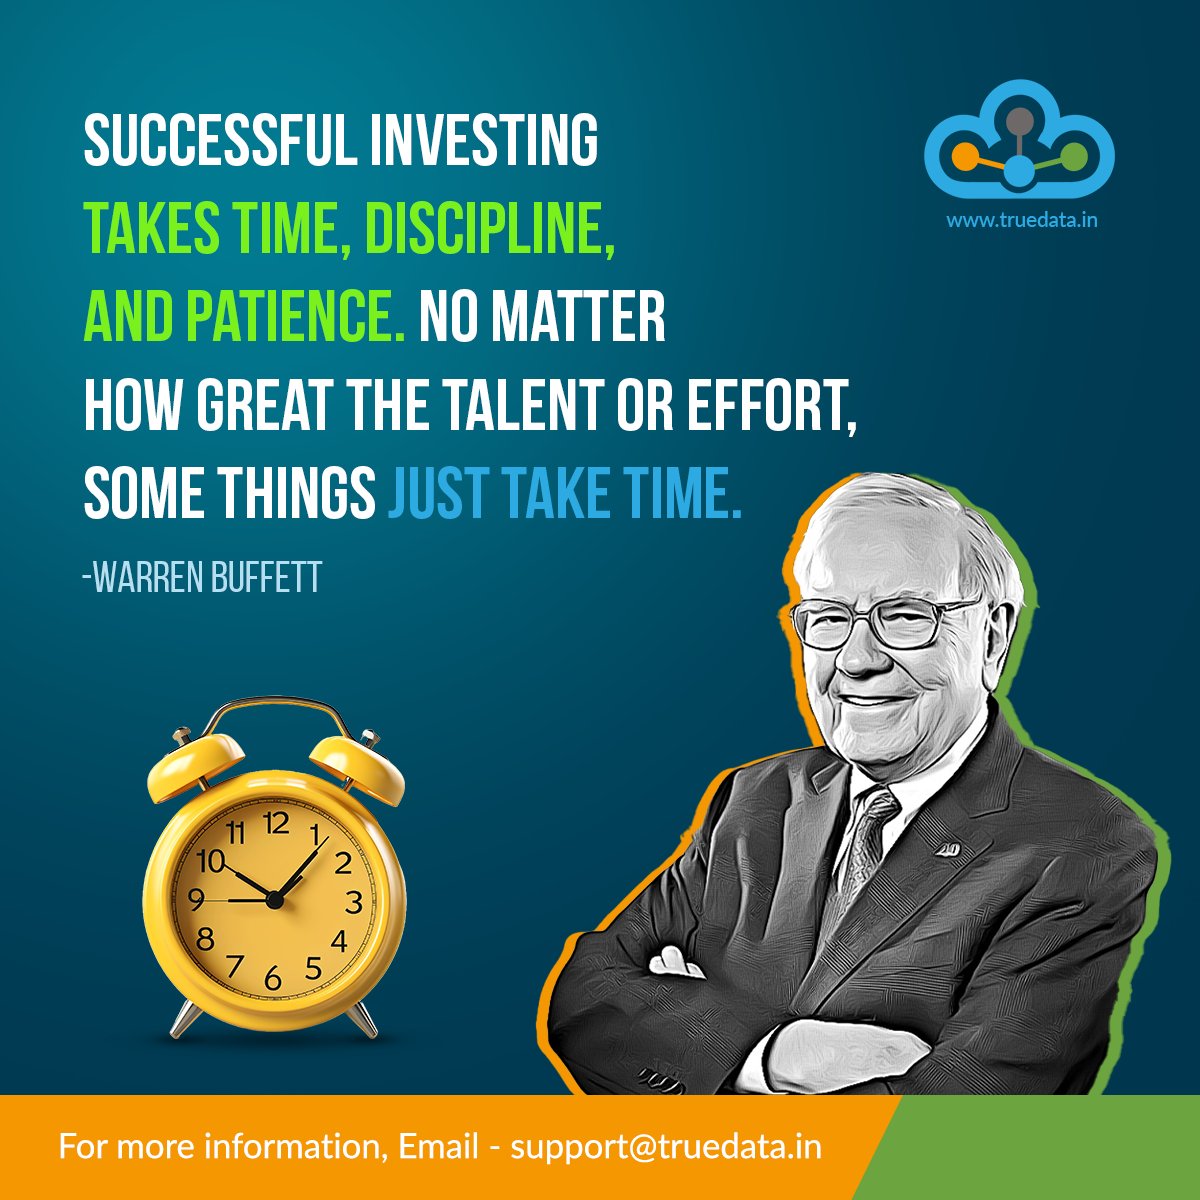 Successful investing takes time, discipline, and patience. no matter how great the talent or effort, some things just take time. 🌱
truedata.in
#TrueData #ShareMarket #LiveMarket #DataPlugin #AnalysisSoftware #WarrenBuffett #stockmarket #trader #investing #tradingrule